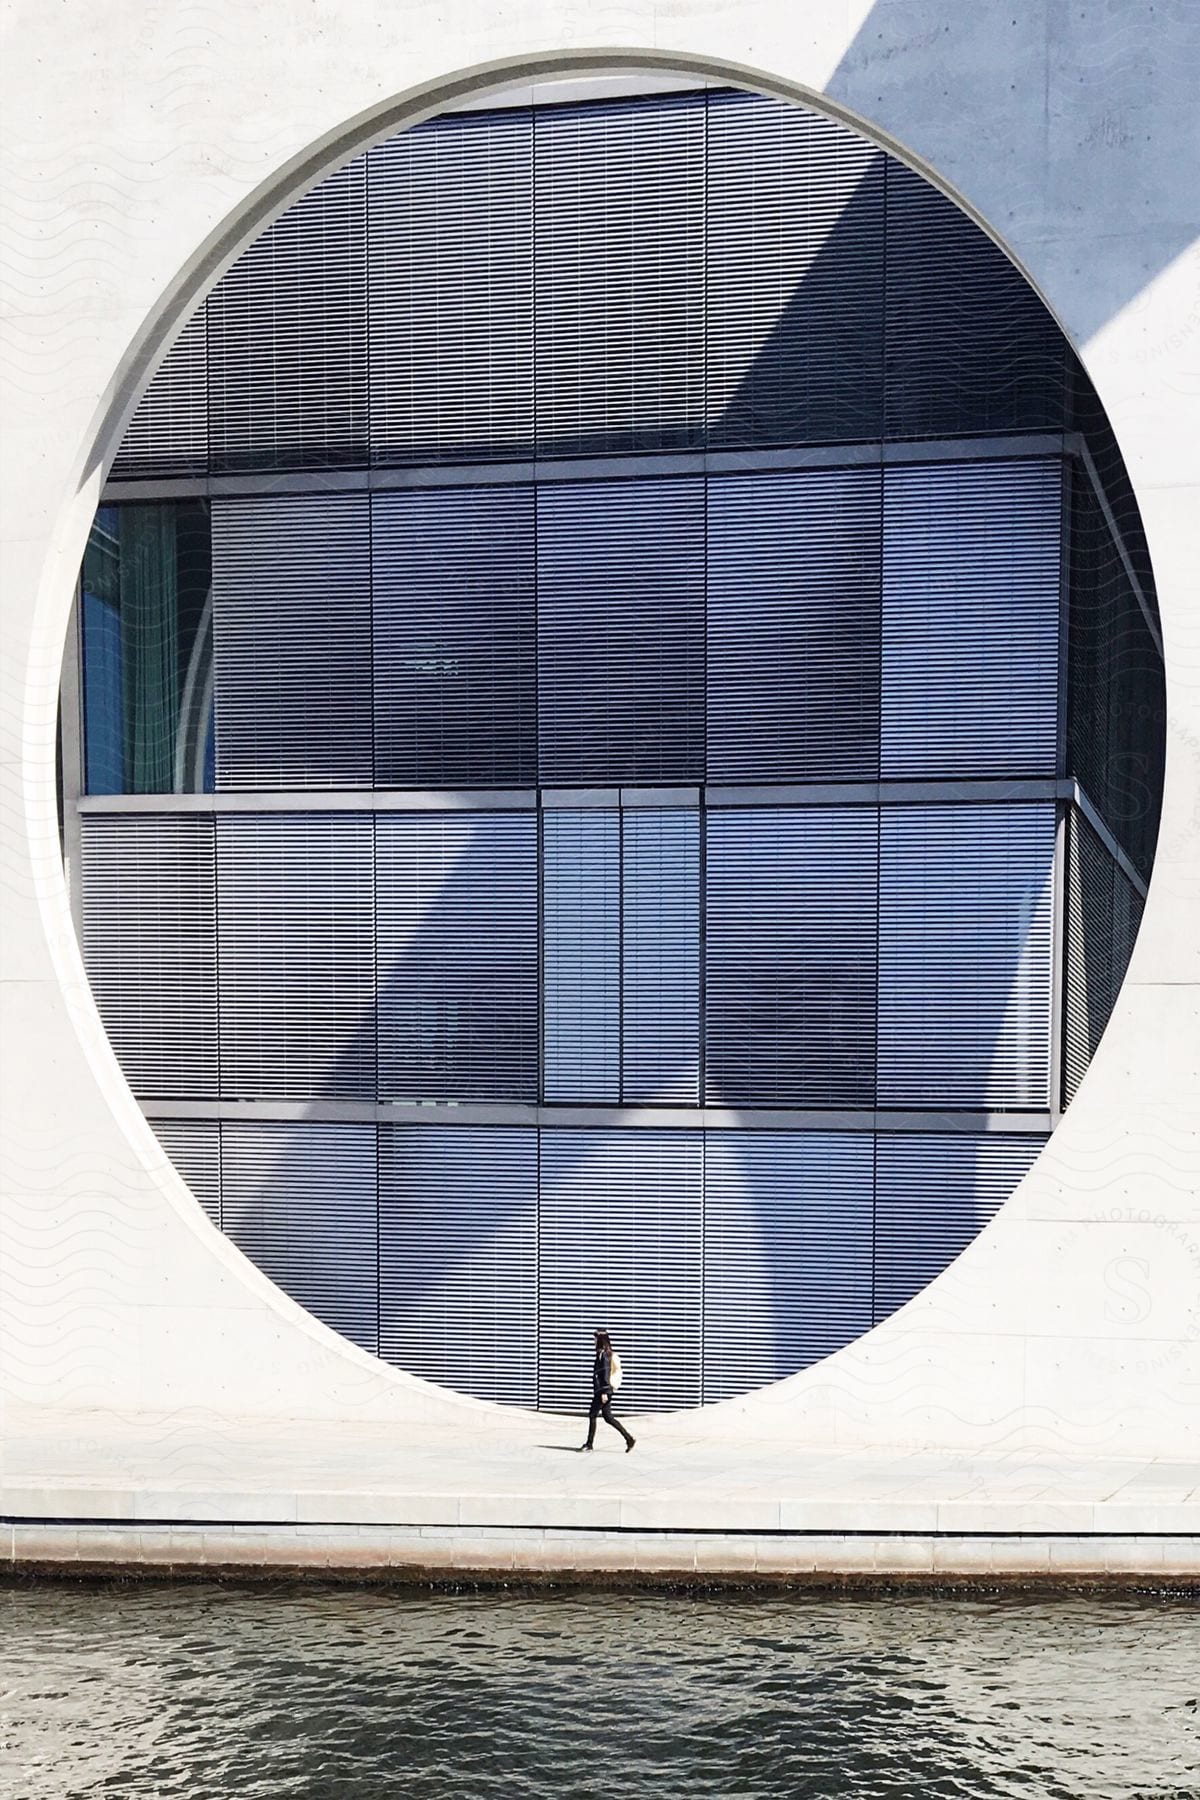 Person walking past a modern building with a circular facade overlooking water.